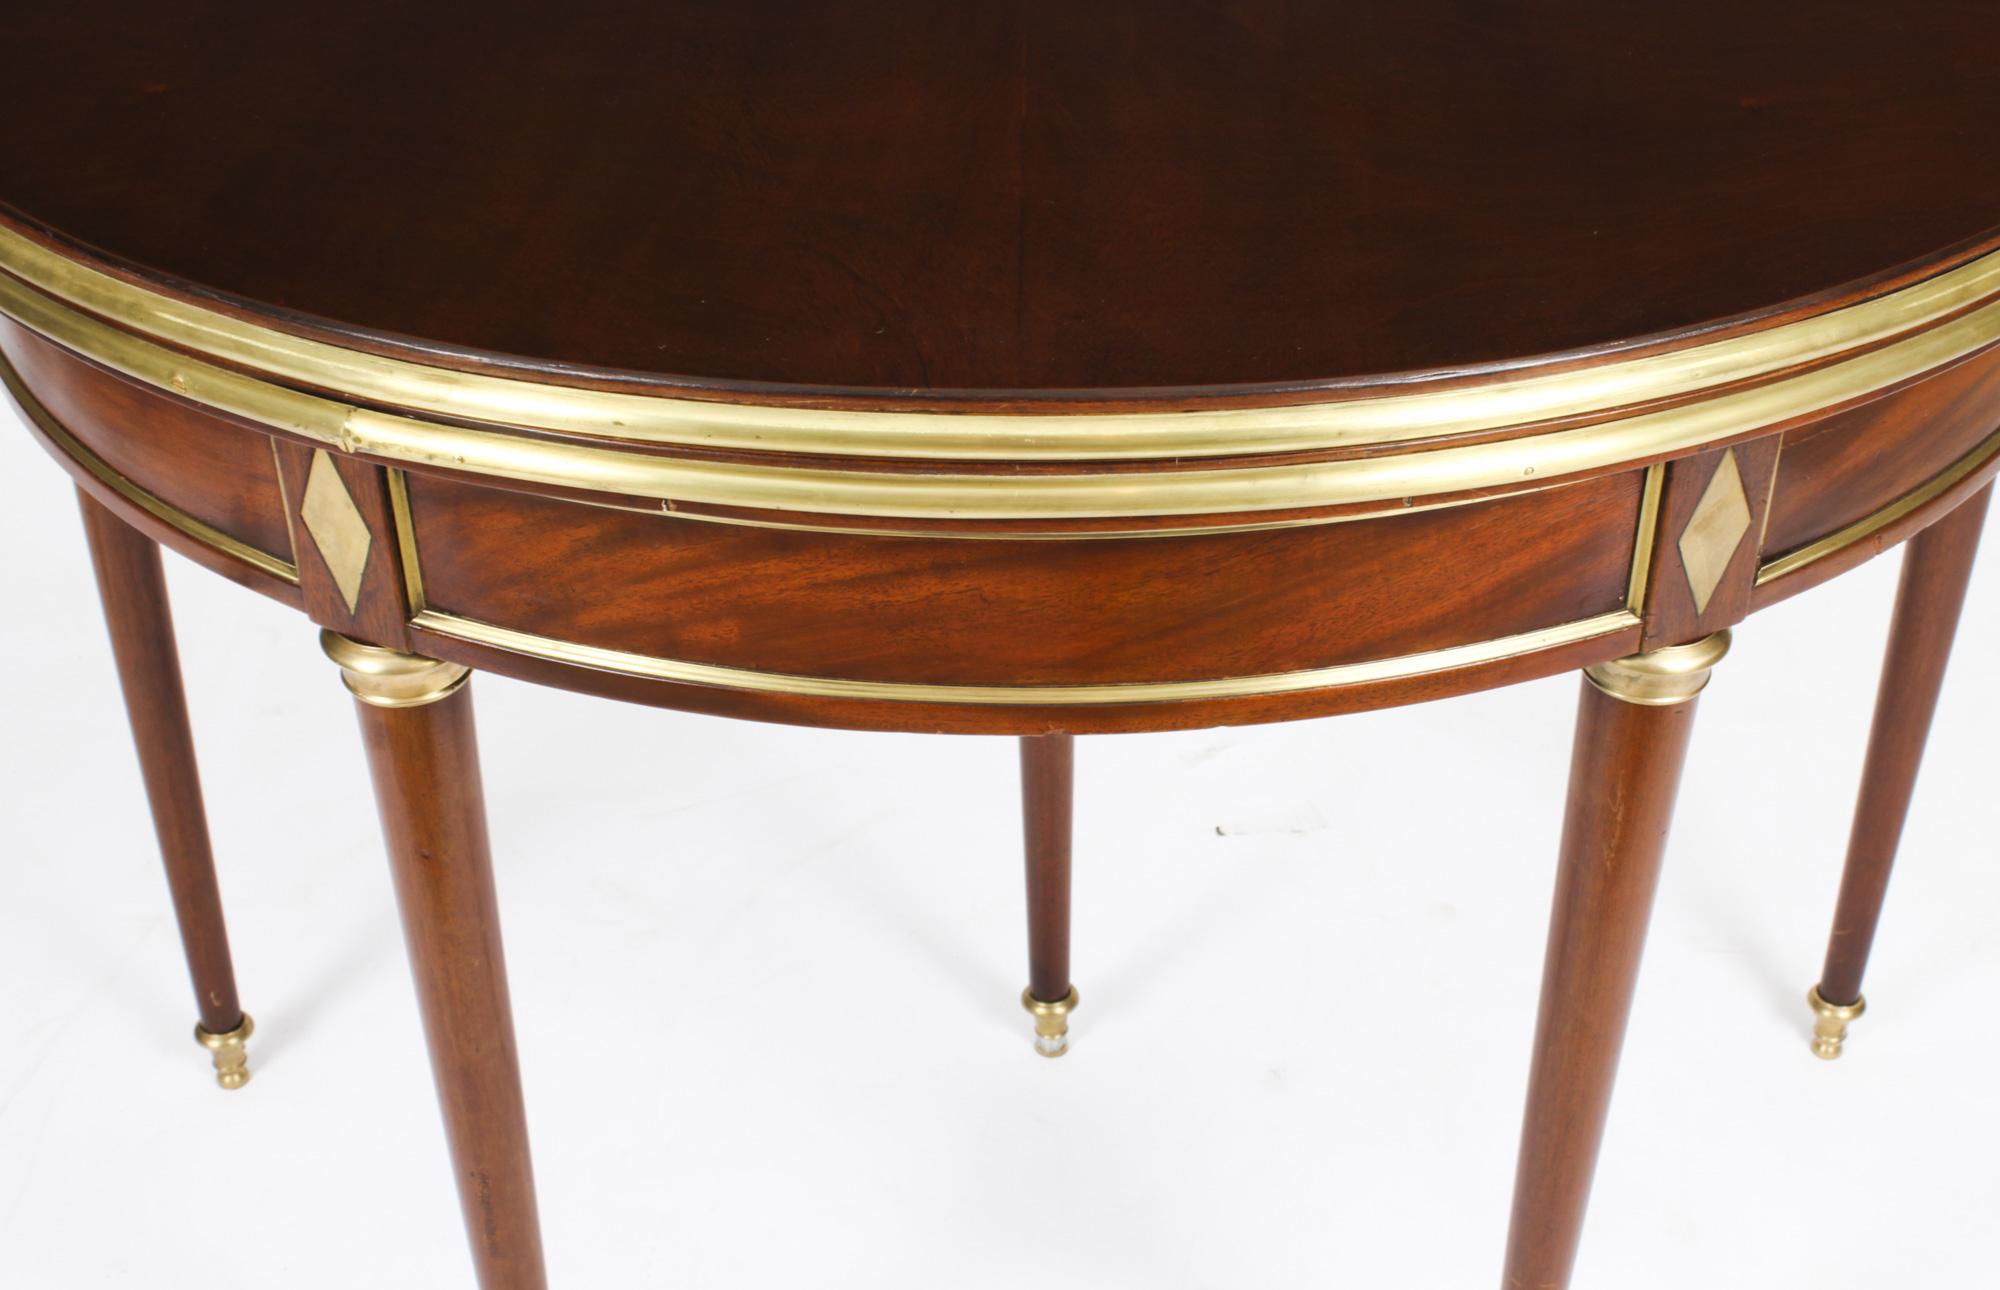 Antique French Directoire Brass Mounted Card Table Early 19th Century For Sale 1